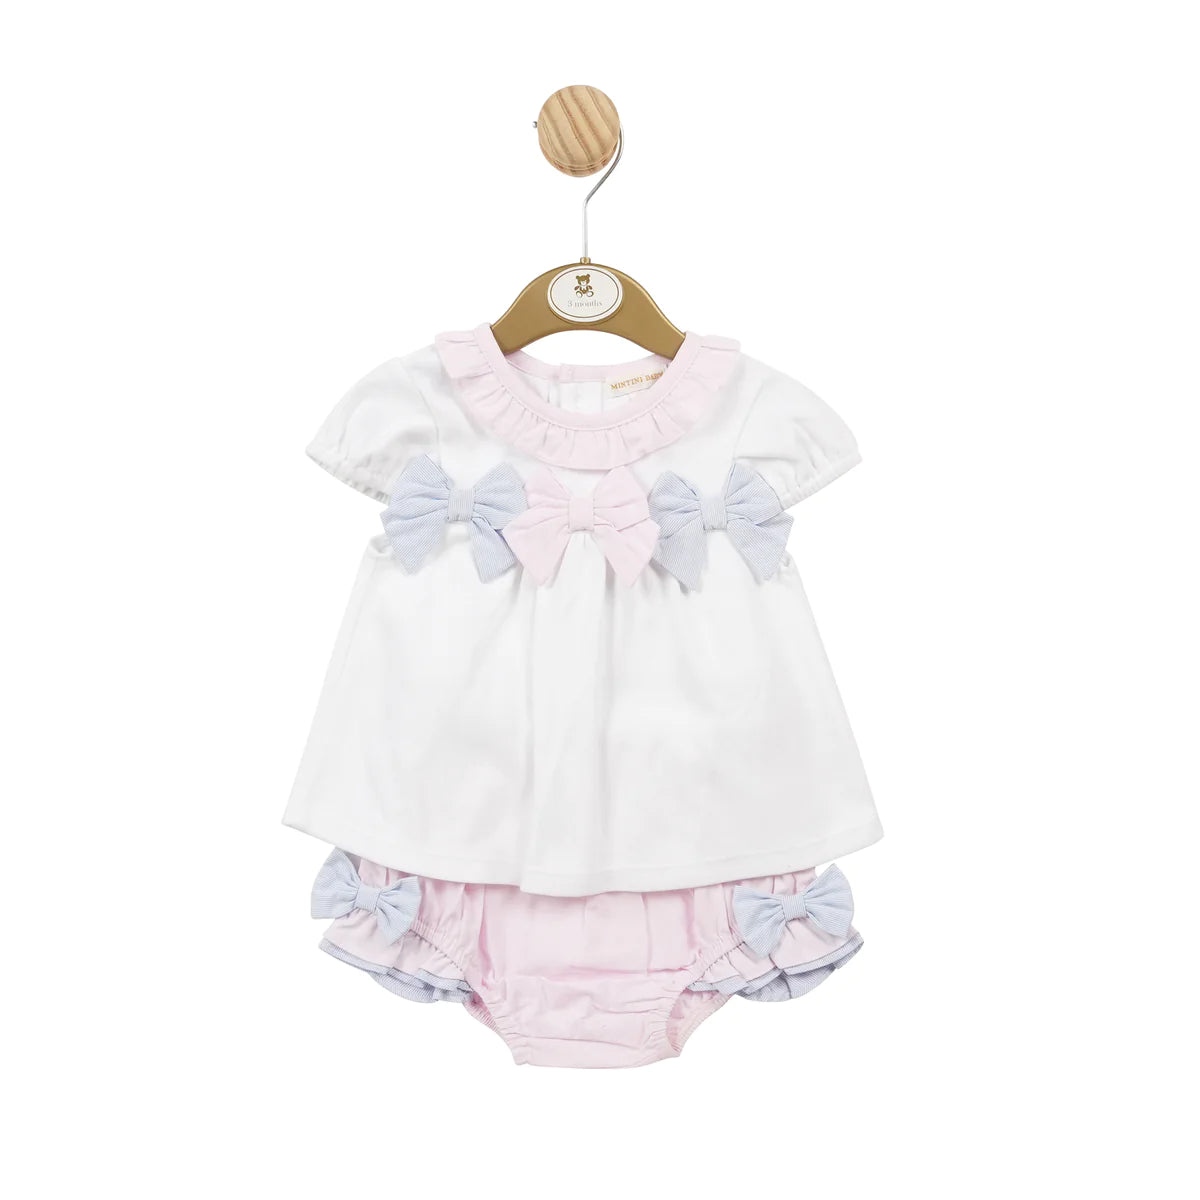 Mintini Bow Bloomer Outfit